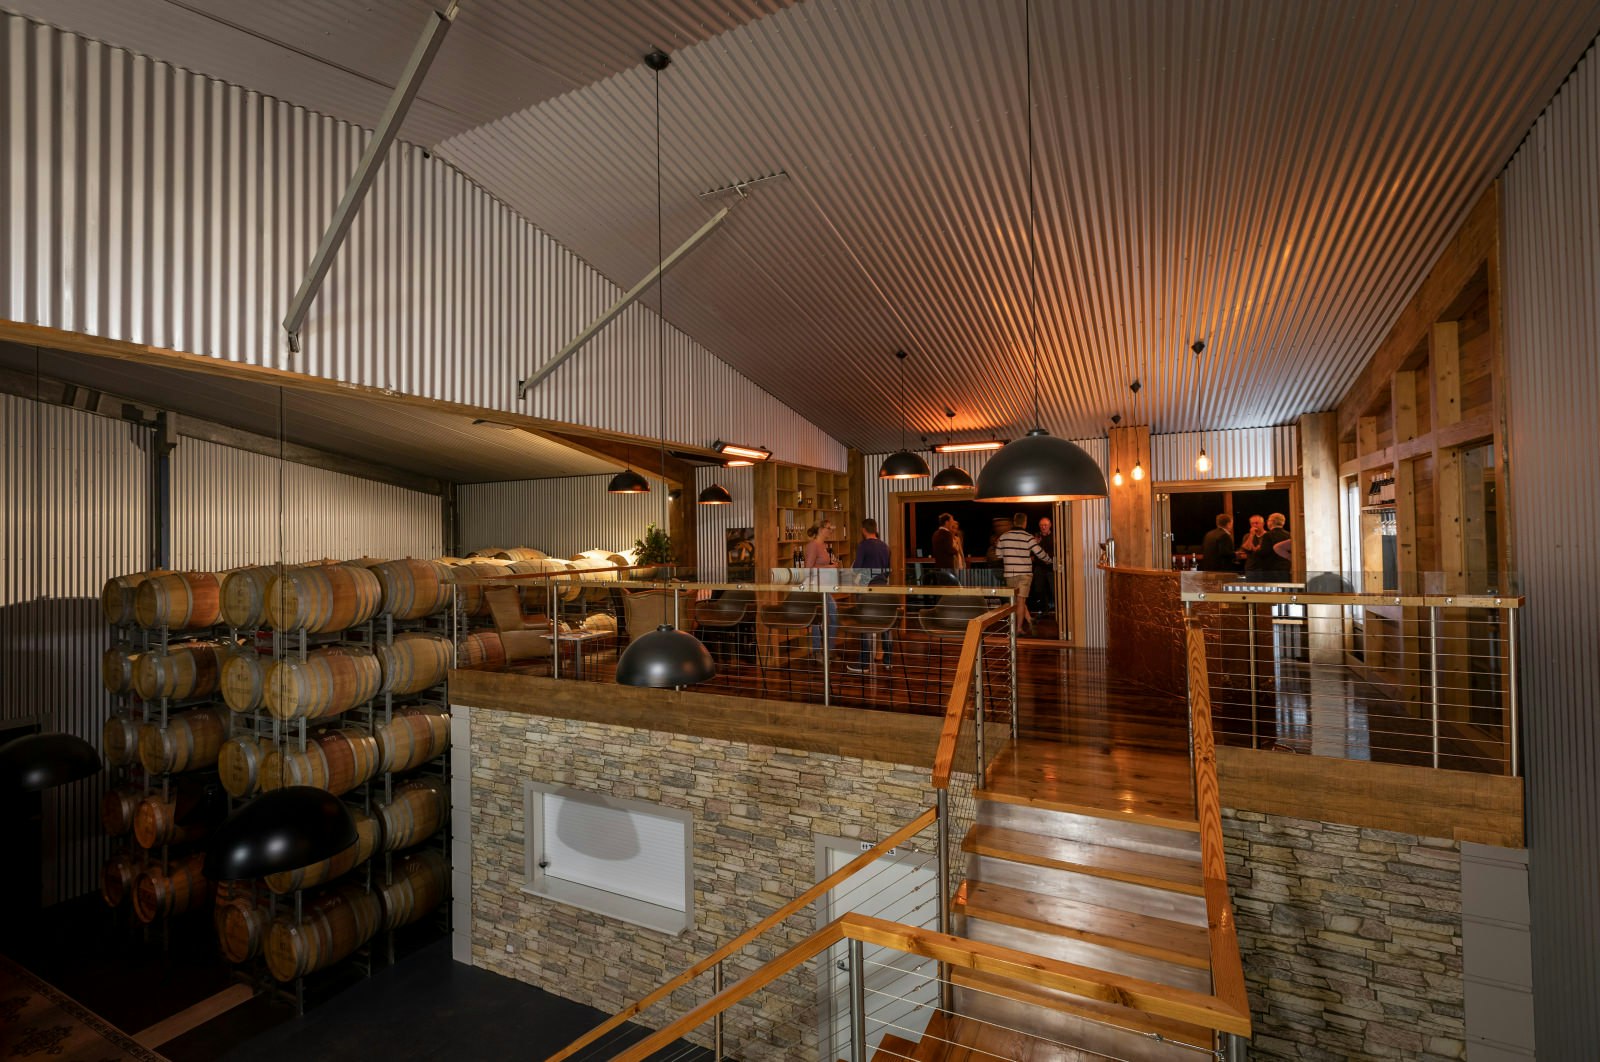 The warehouse-like interior of Aztes Corner Wines in Barossa Valley. Casks of wine are stacked on the left with a small bar on the right.